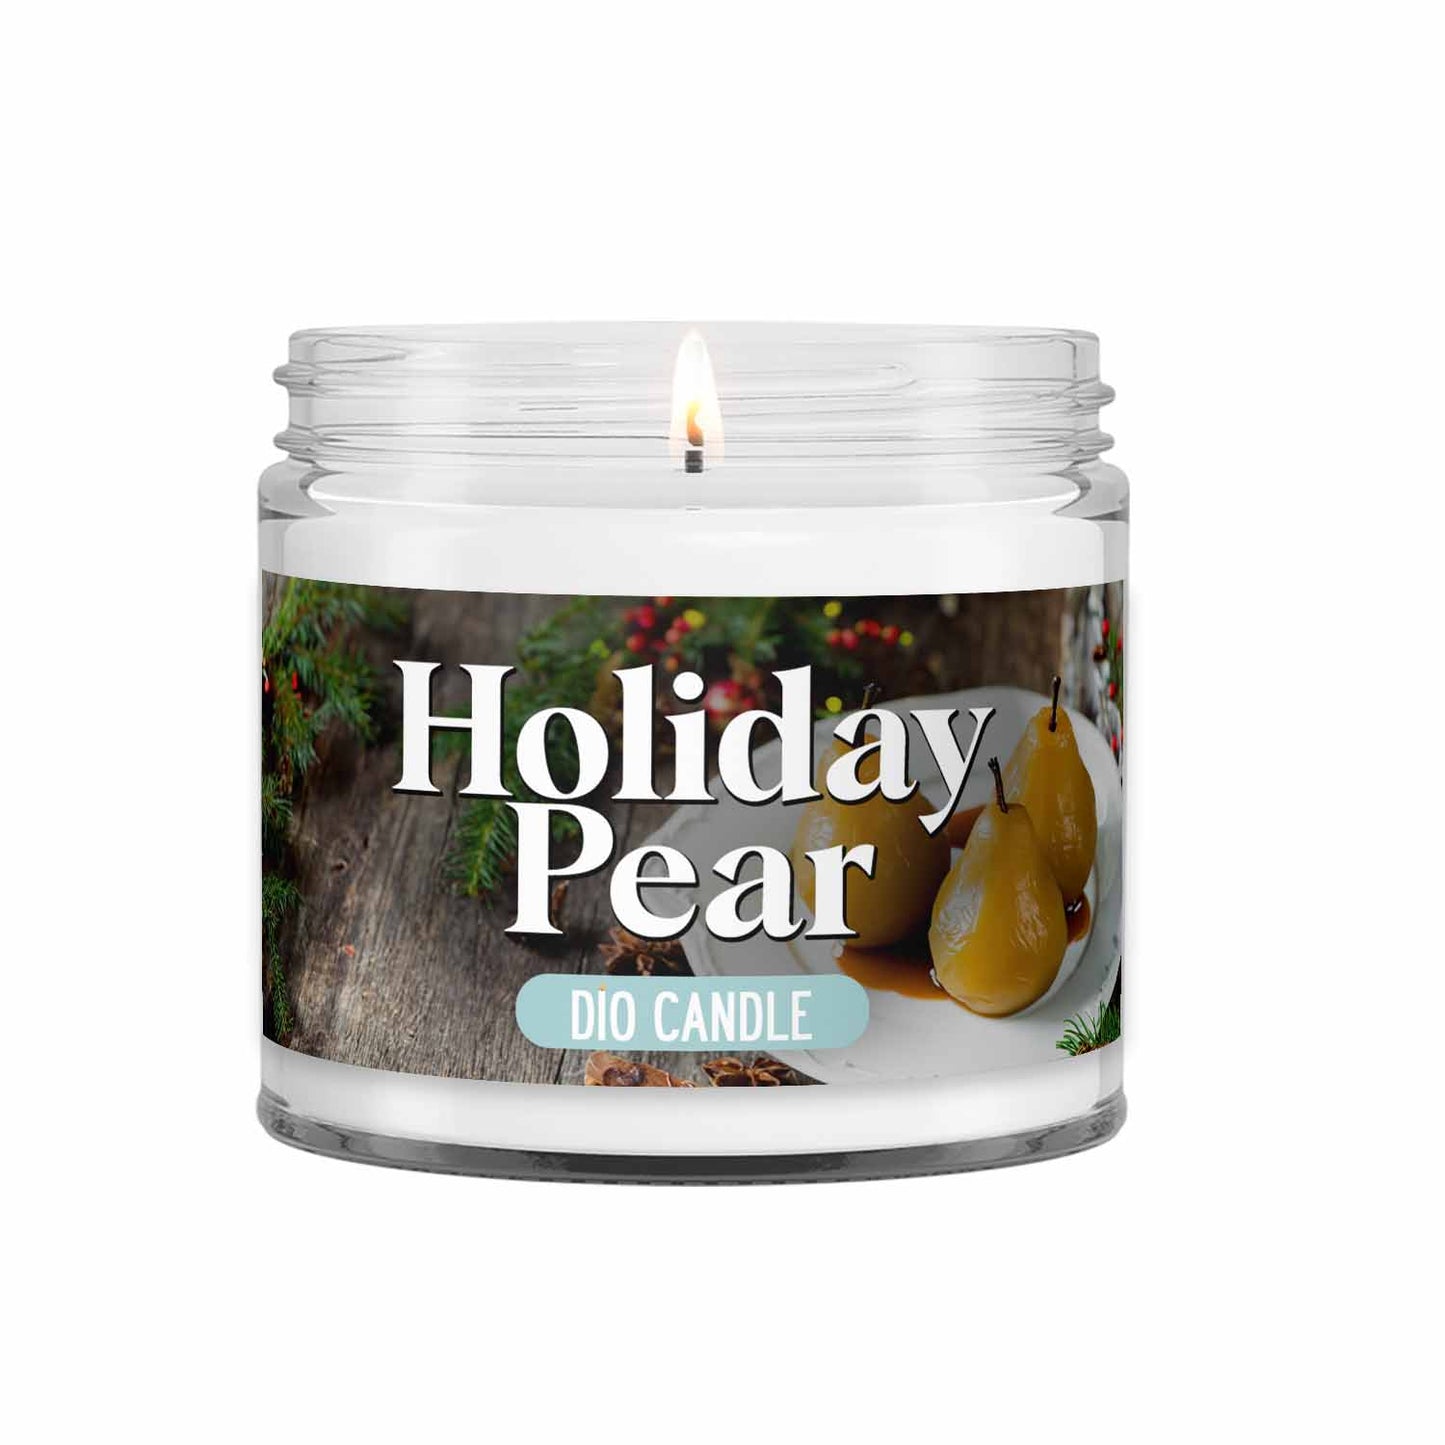 Holiday Pear Candle